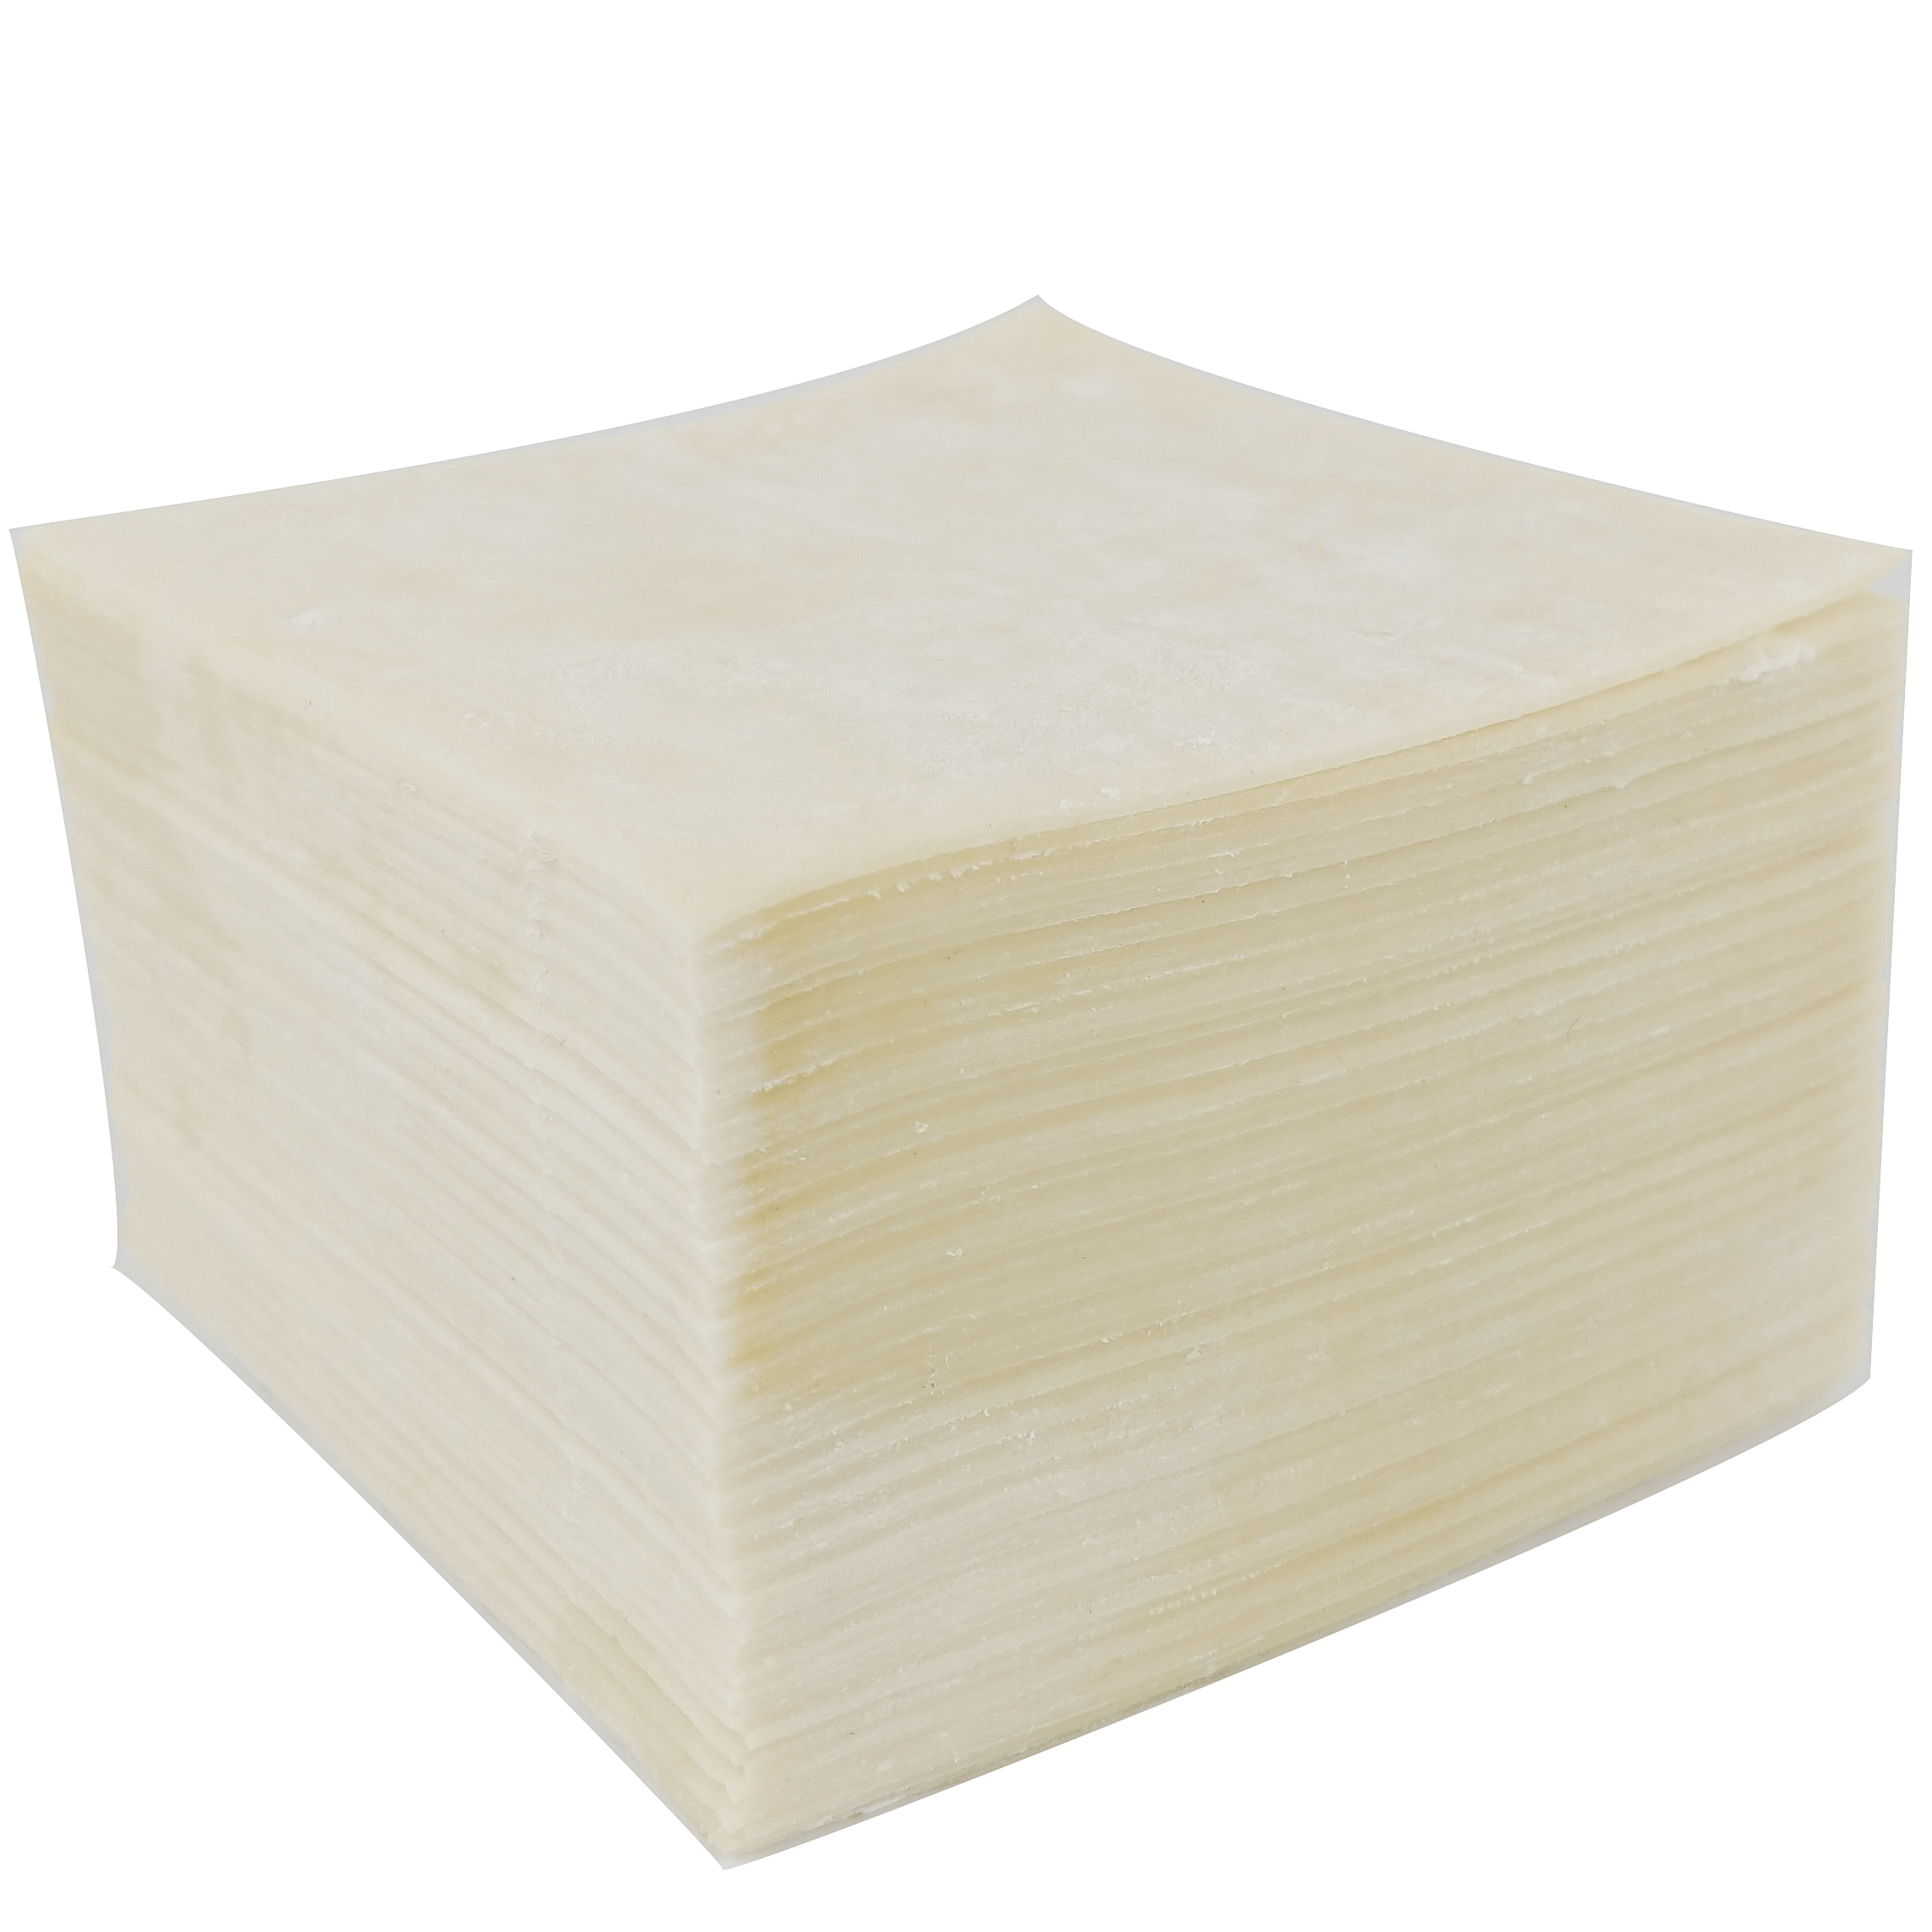 Stack of square shaped wonton wrappers